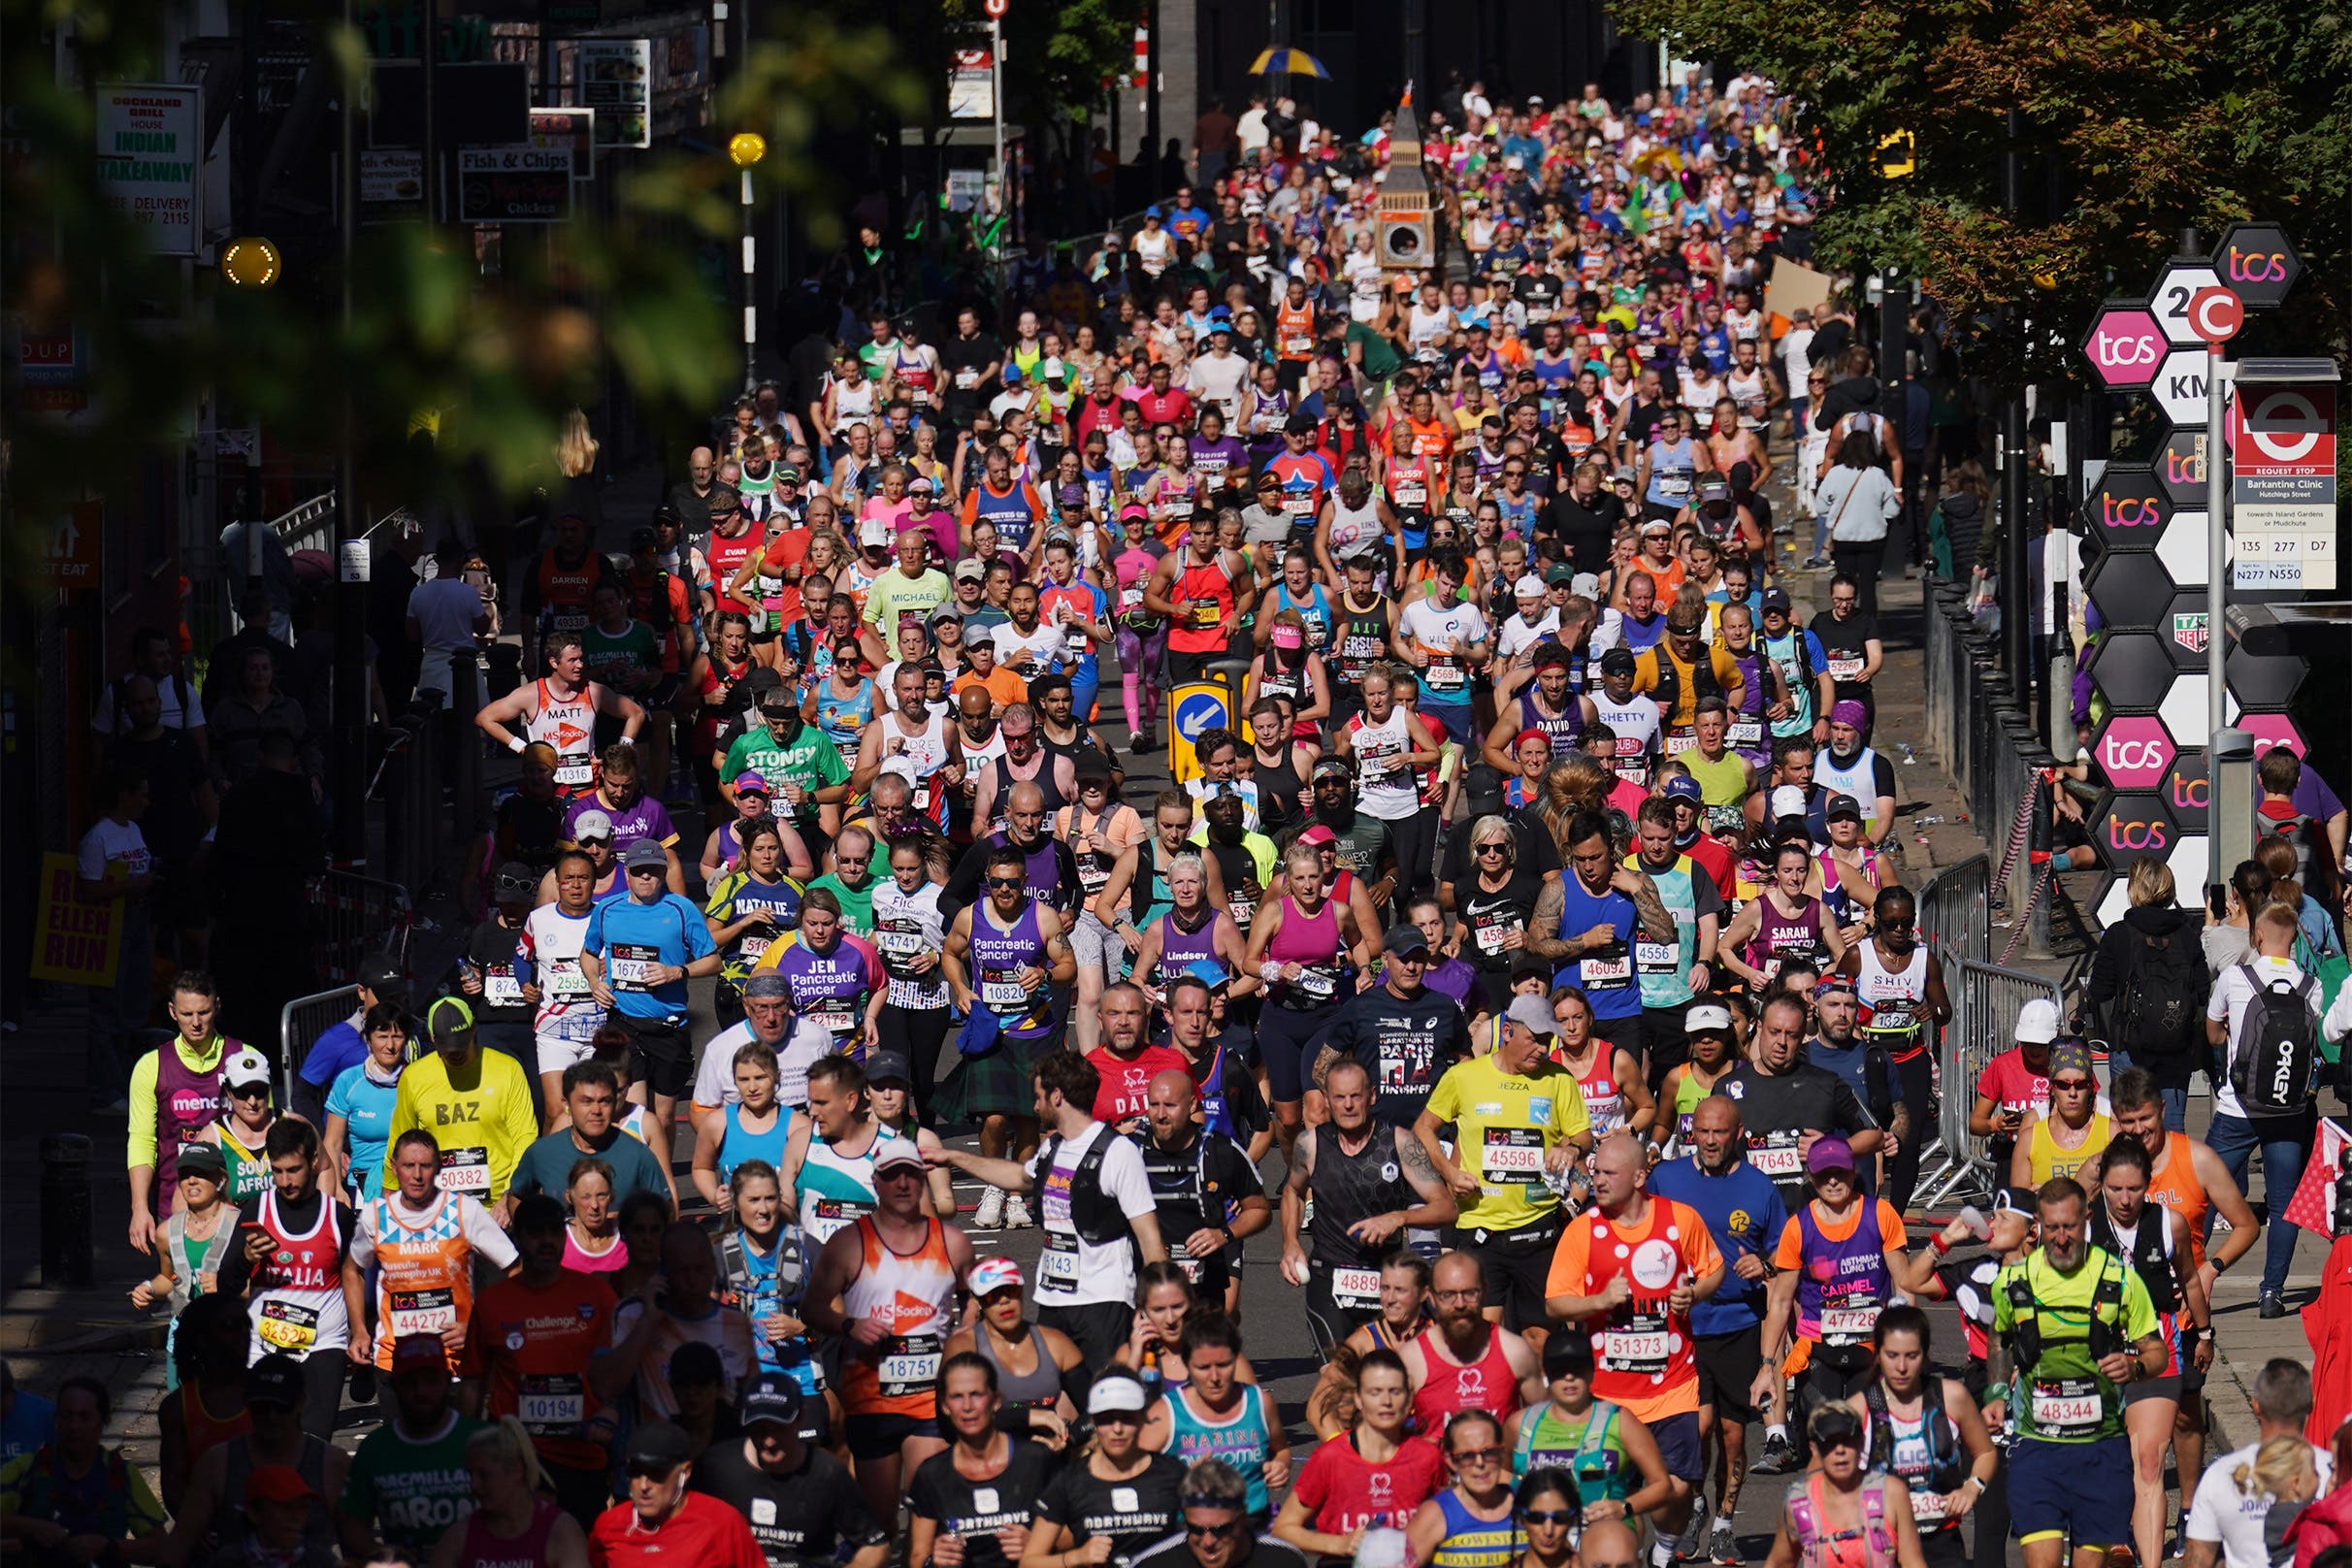 The London Marathon is one of the United Kingdom’s most famous sporting events